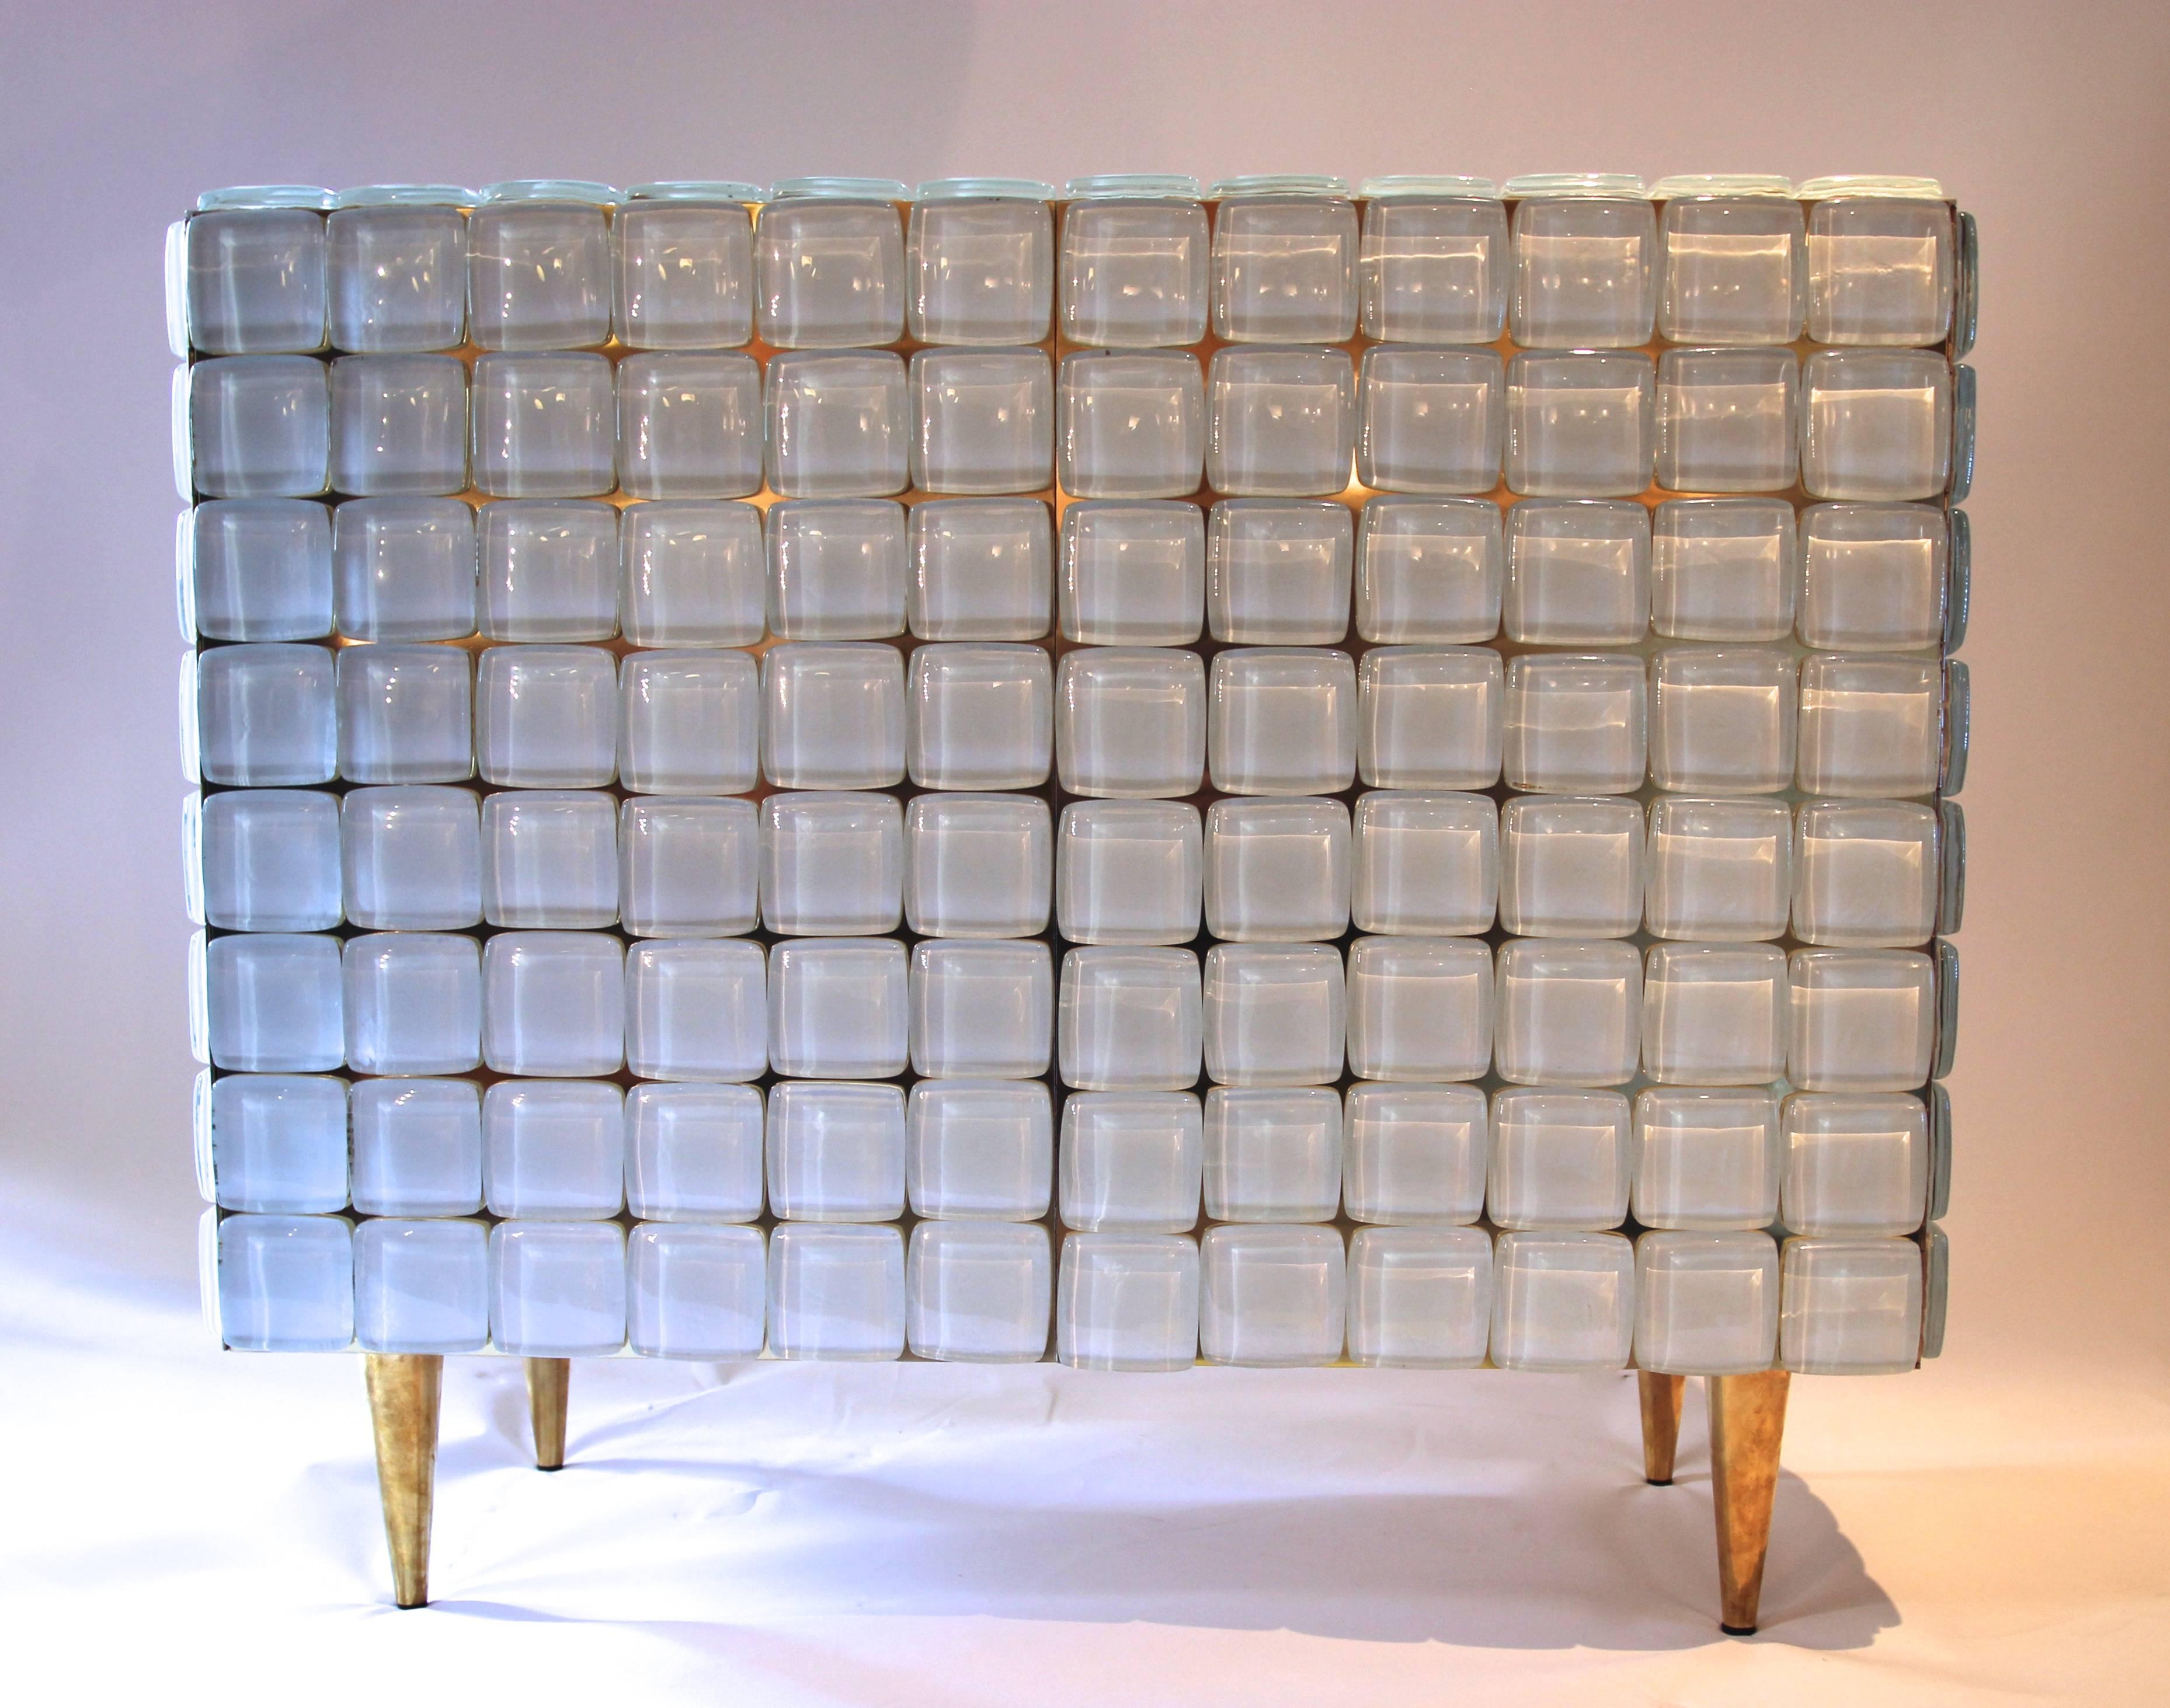 Style Roberto Giulio Rida,
Pair of commode with two doors,
Glass and gilded bronze feet,
Fully covered with white faceted glass tiles,
Interior white lacquer,
circa 2010, Italy.
Measures: Height: 78 cm, width: 93 cm, depth: 40 cm.